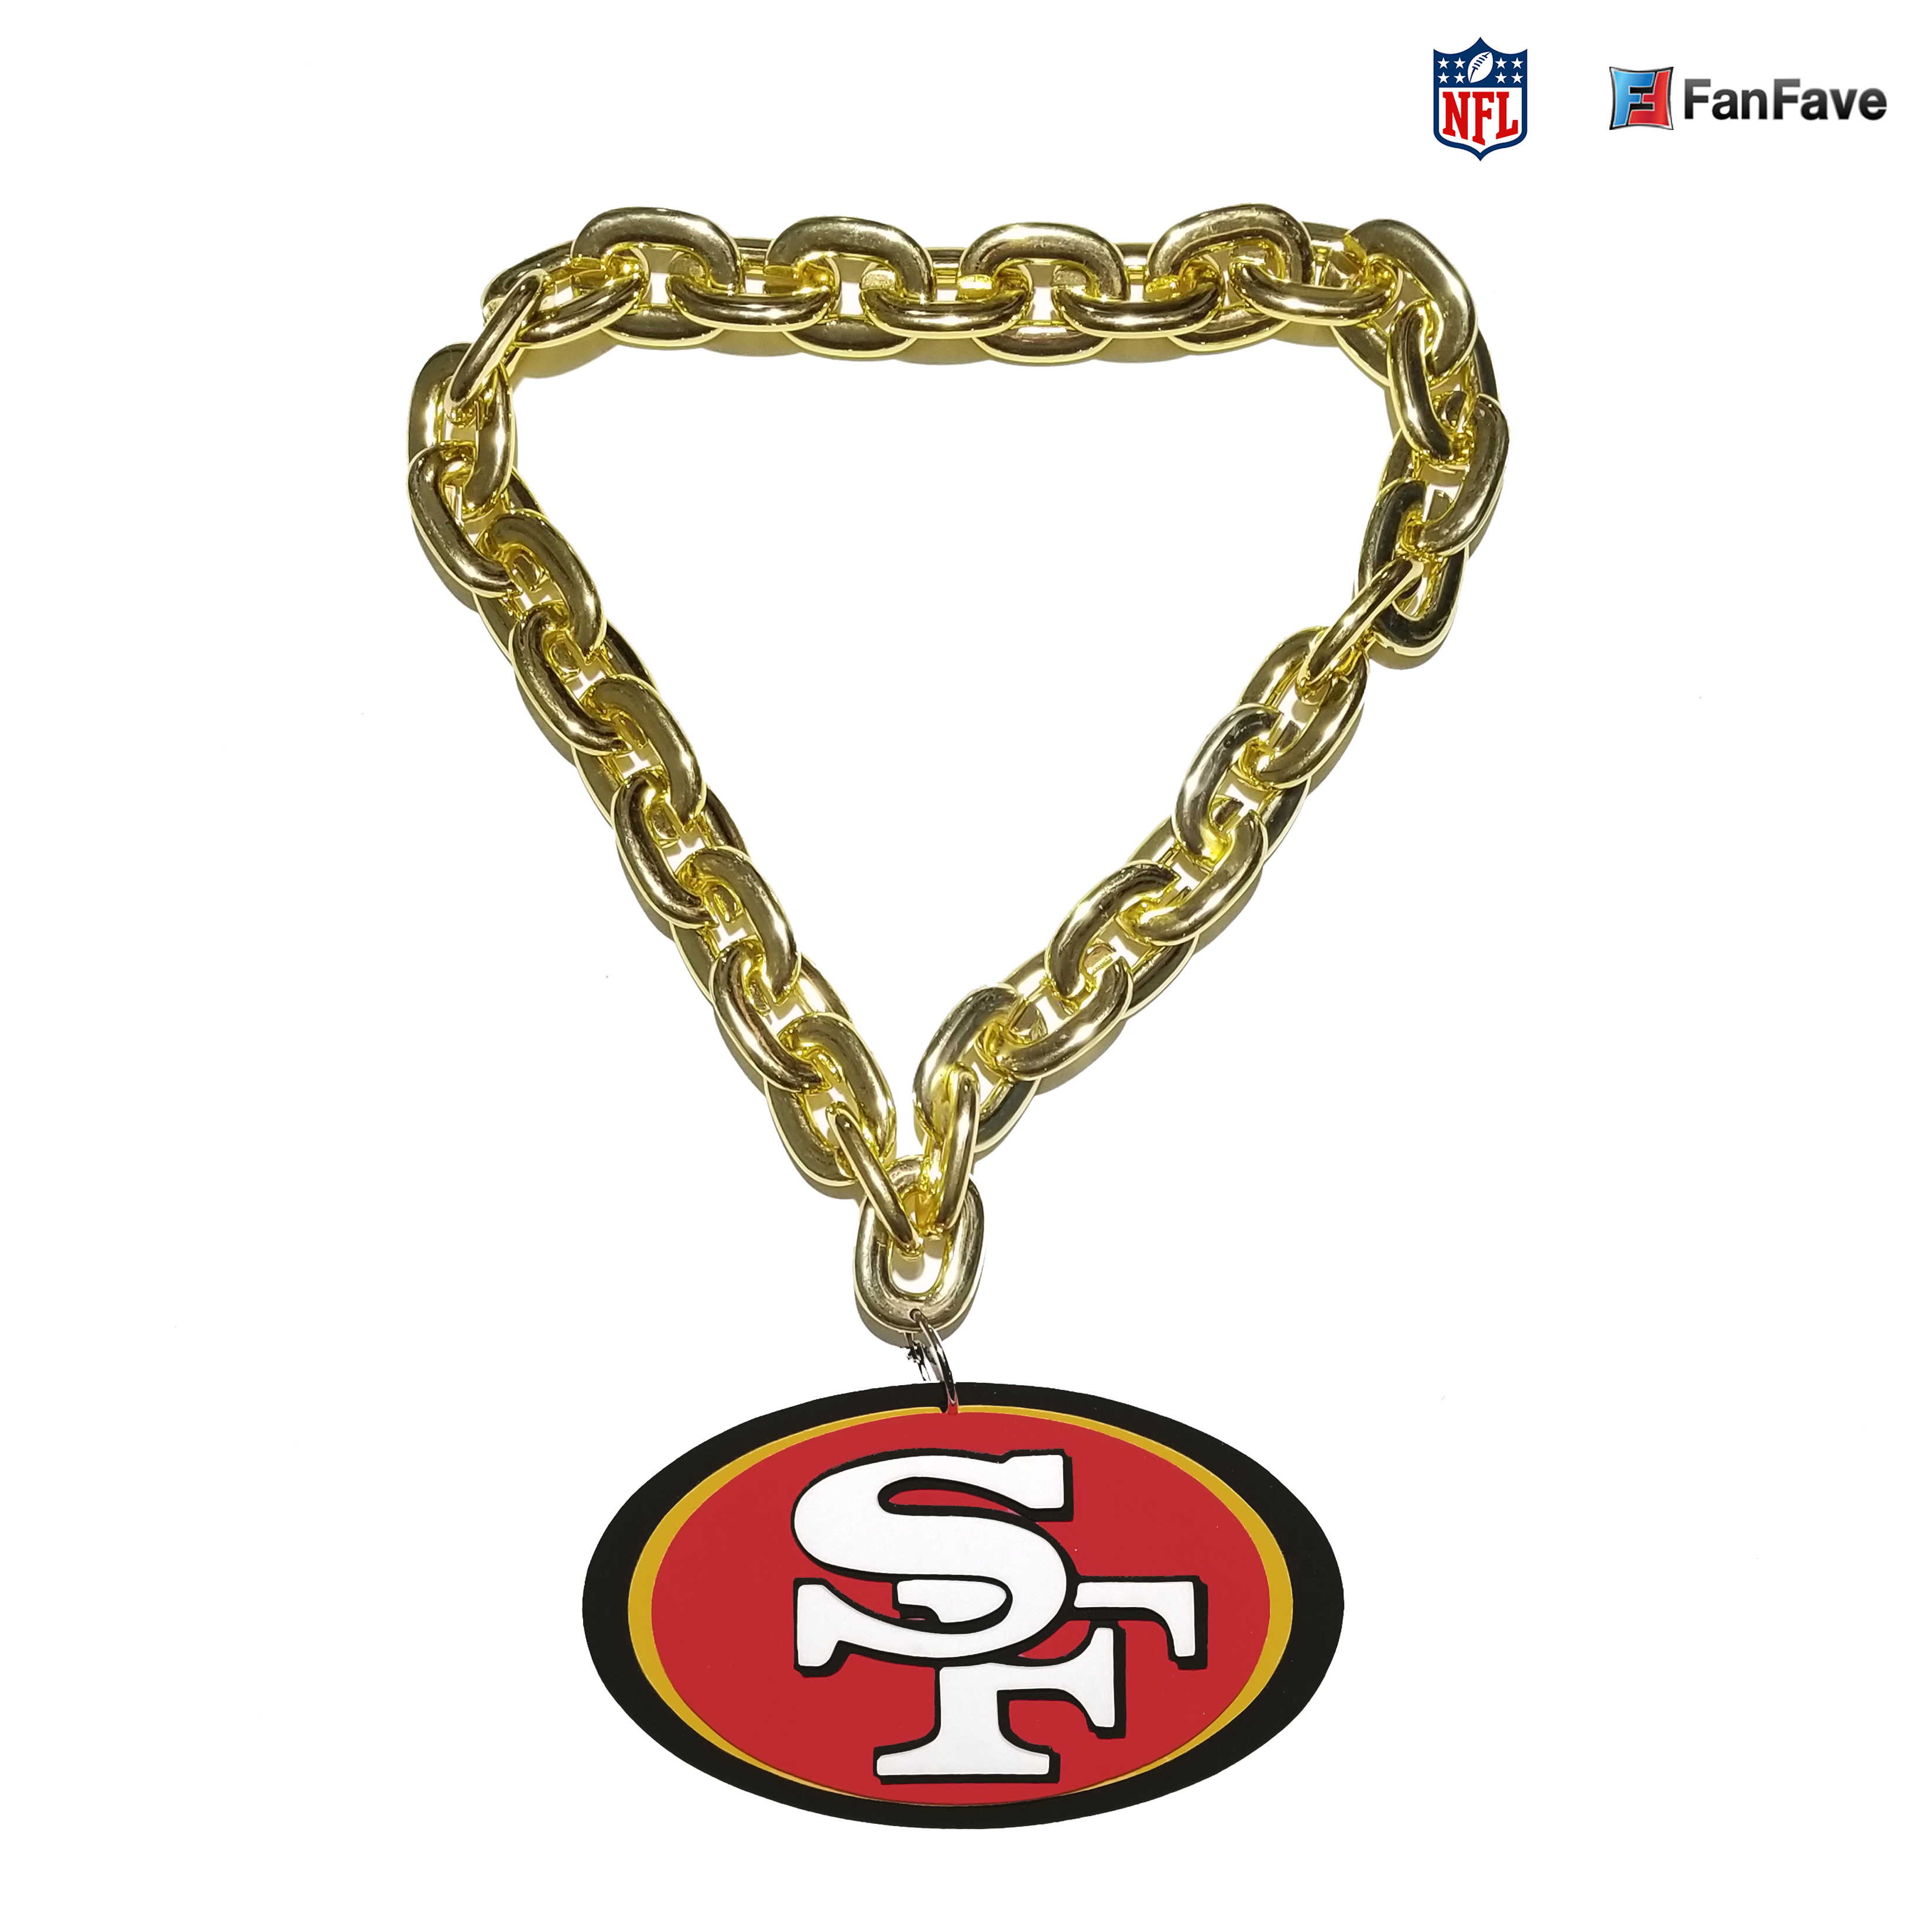 14kt Yellow Gold NFL San Francisco 49ers Pendant Necklace. 18